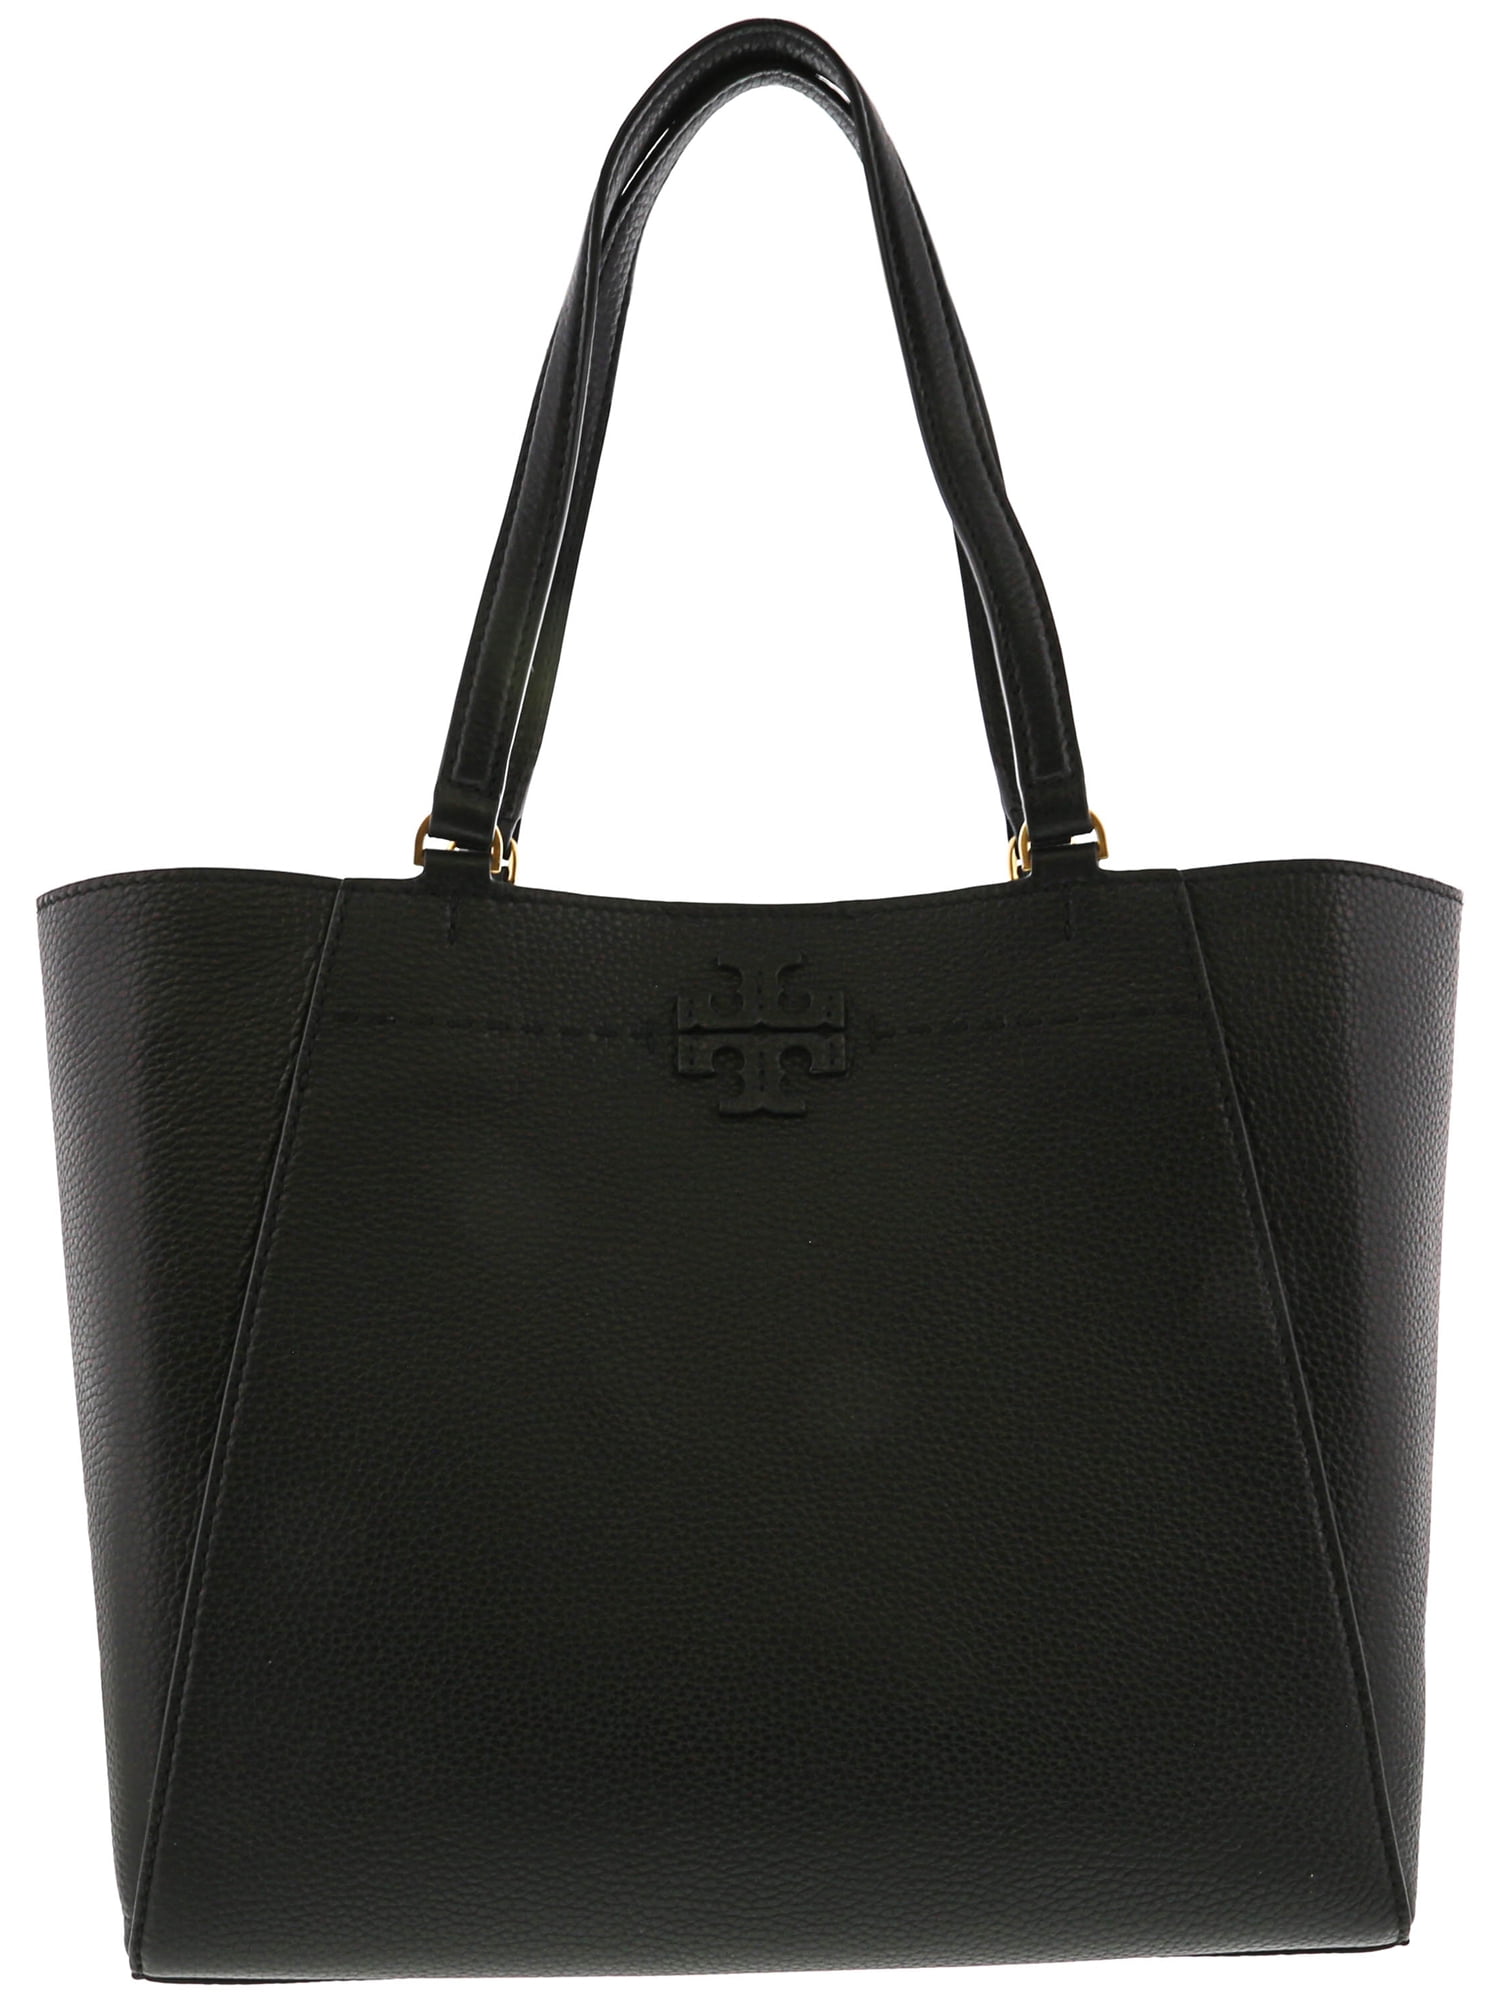 Tory Burch Women's Mcgraw Carryall Leather Evening Bag Tote - Black ...